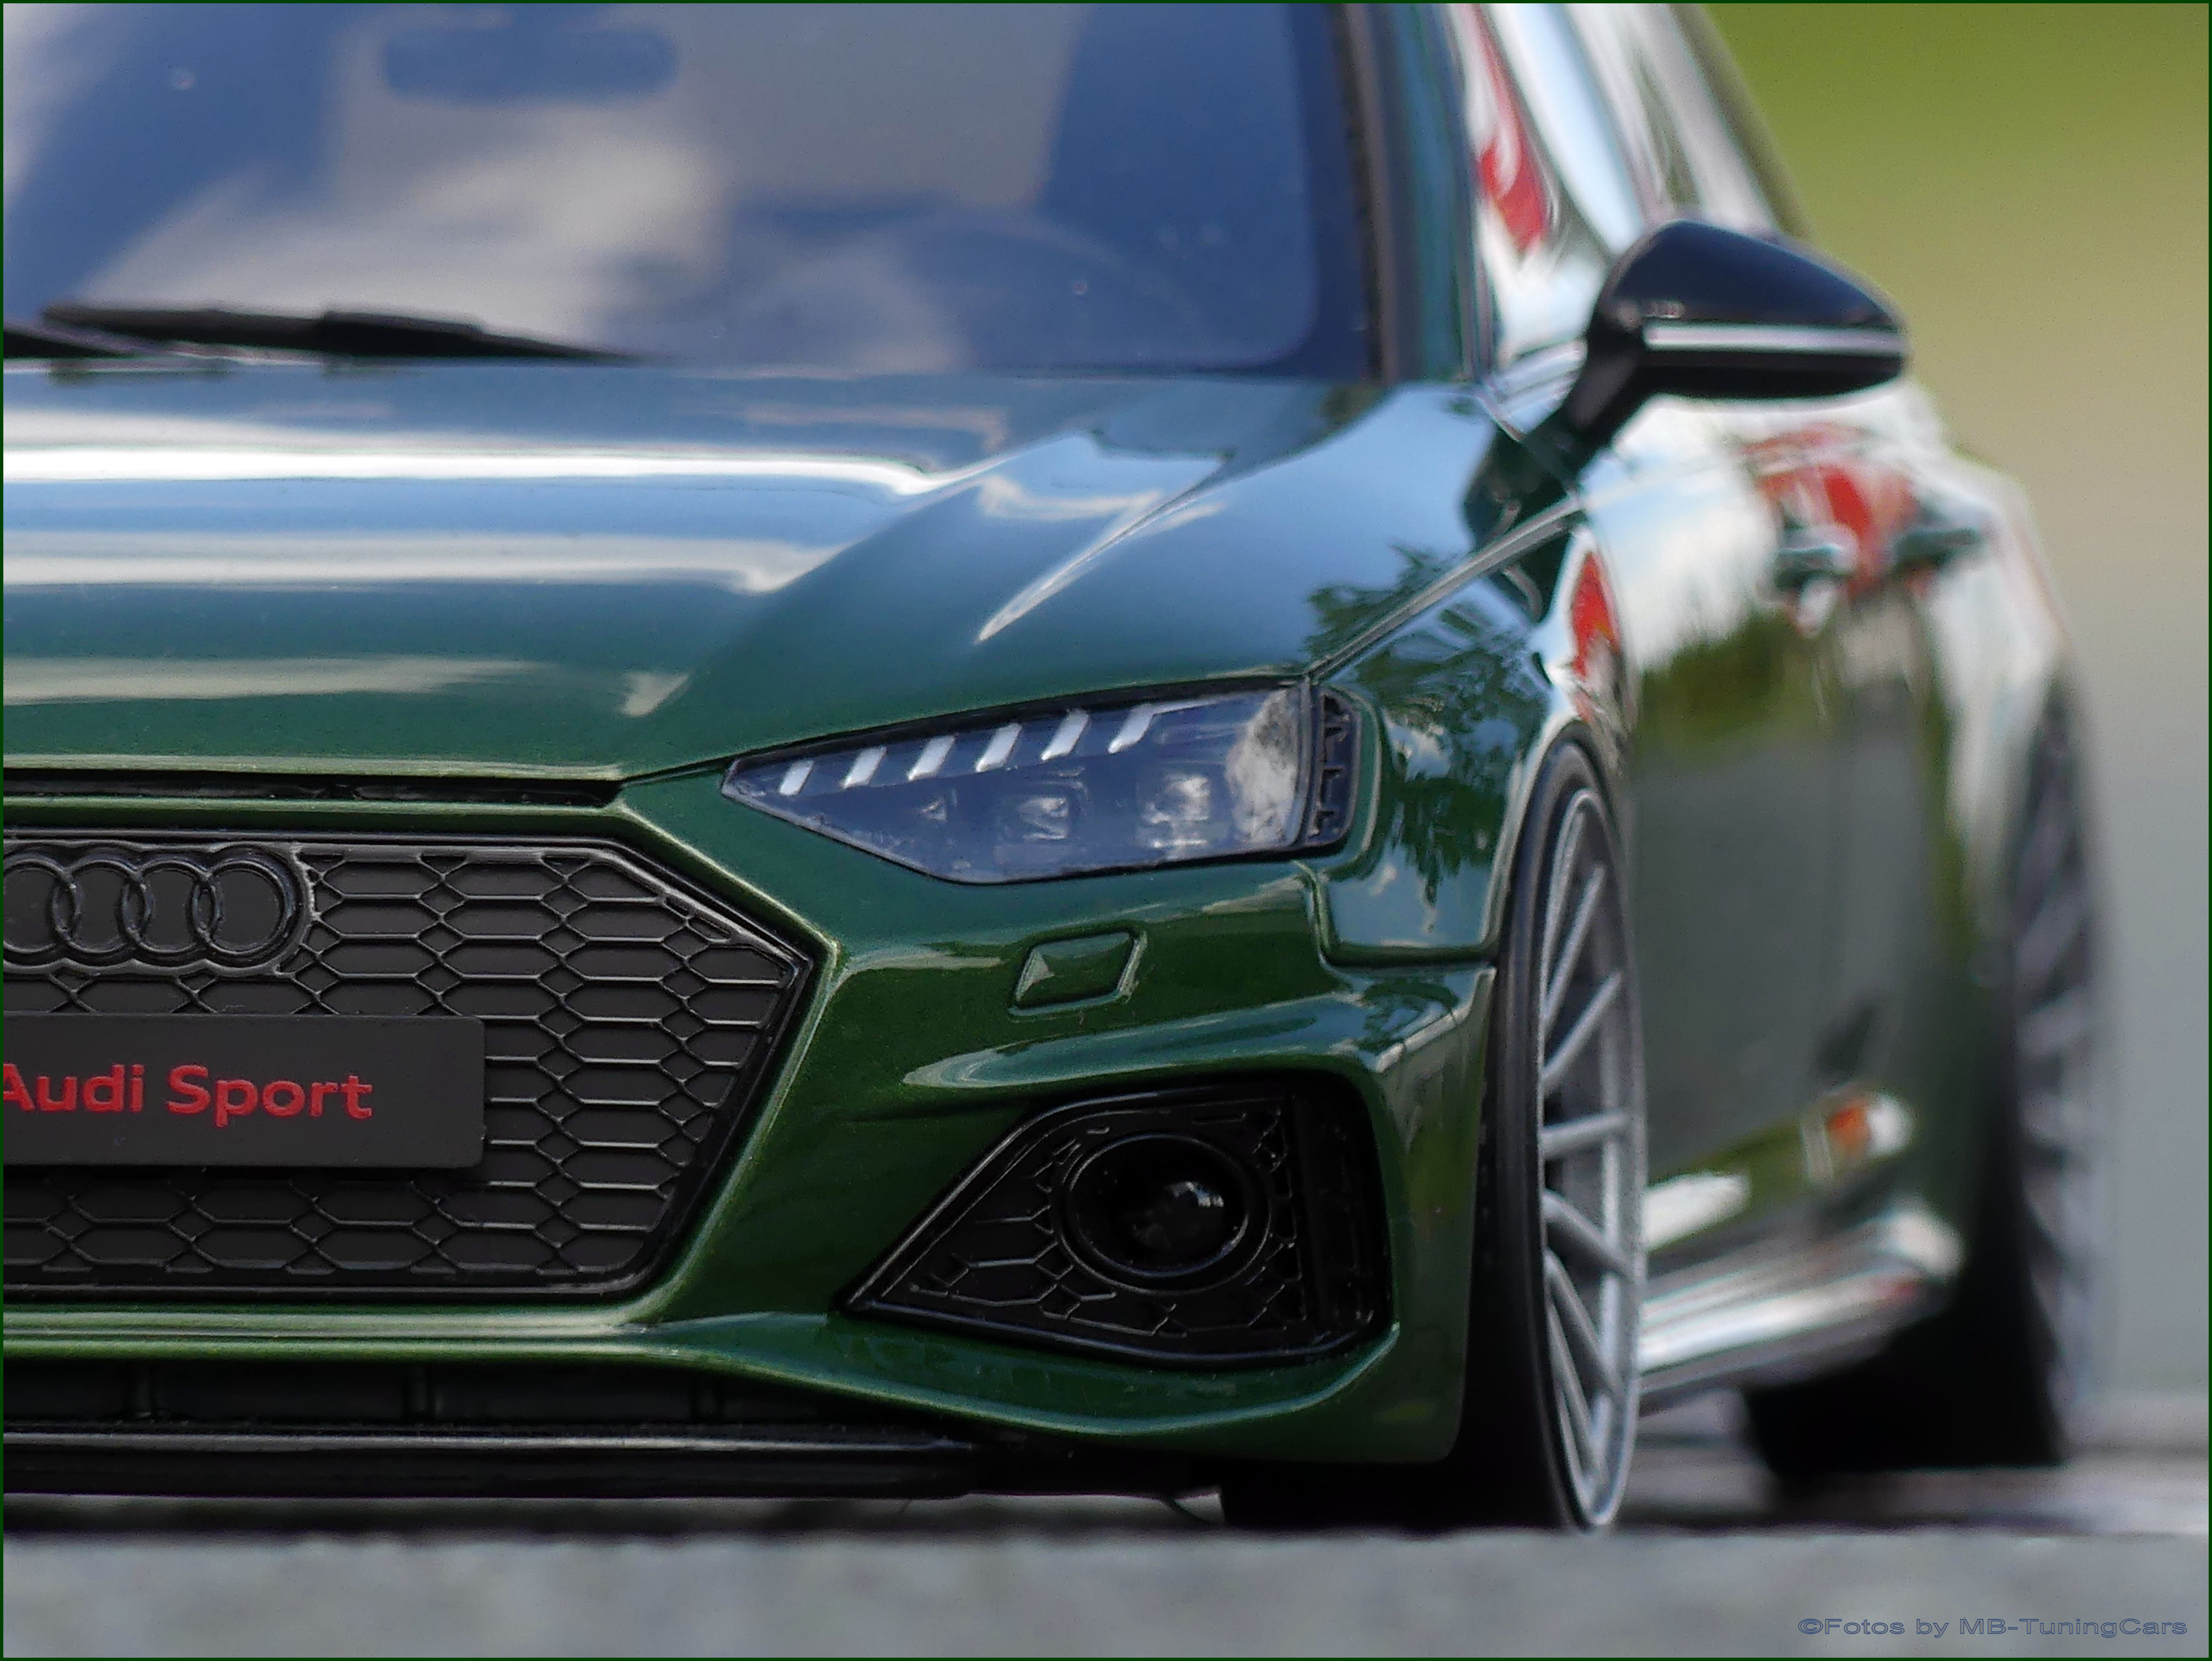 https://www.mb-tuningcars.de/images/product_images/original_images/RS4%20Green%20(1).JPG